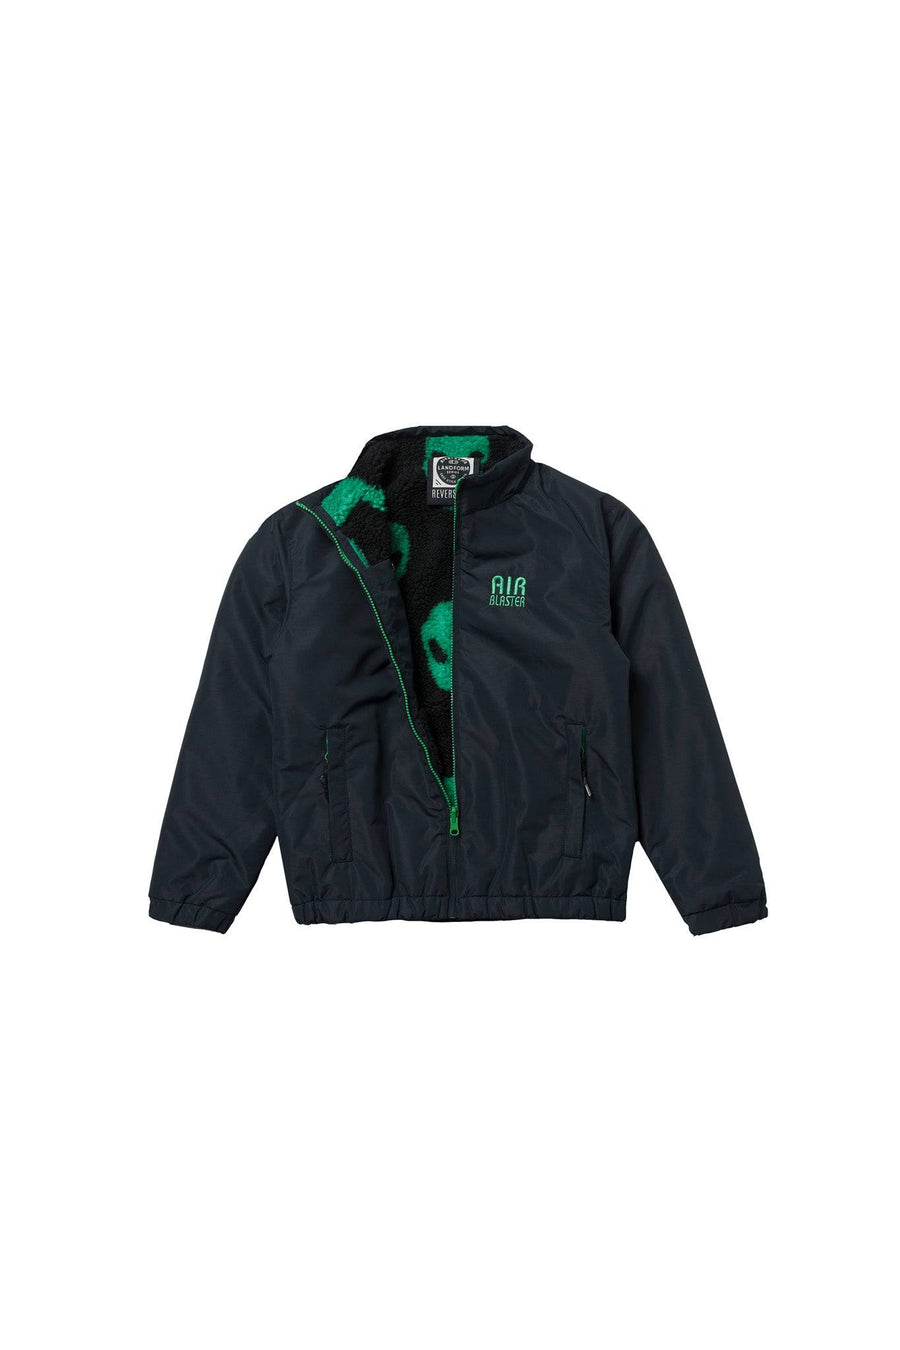 Airblaster Youth Double Puffling Jacket in Big Alien 2023